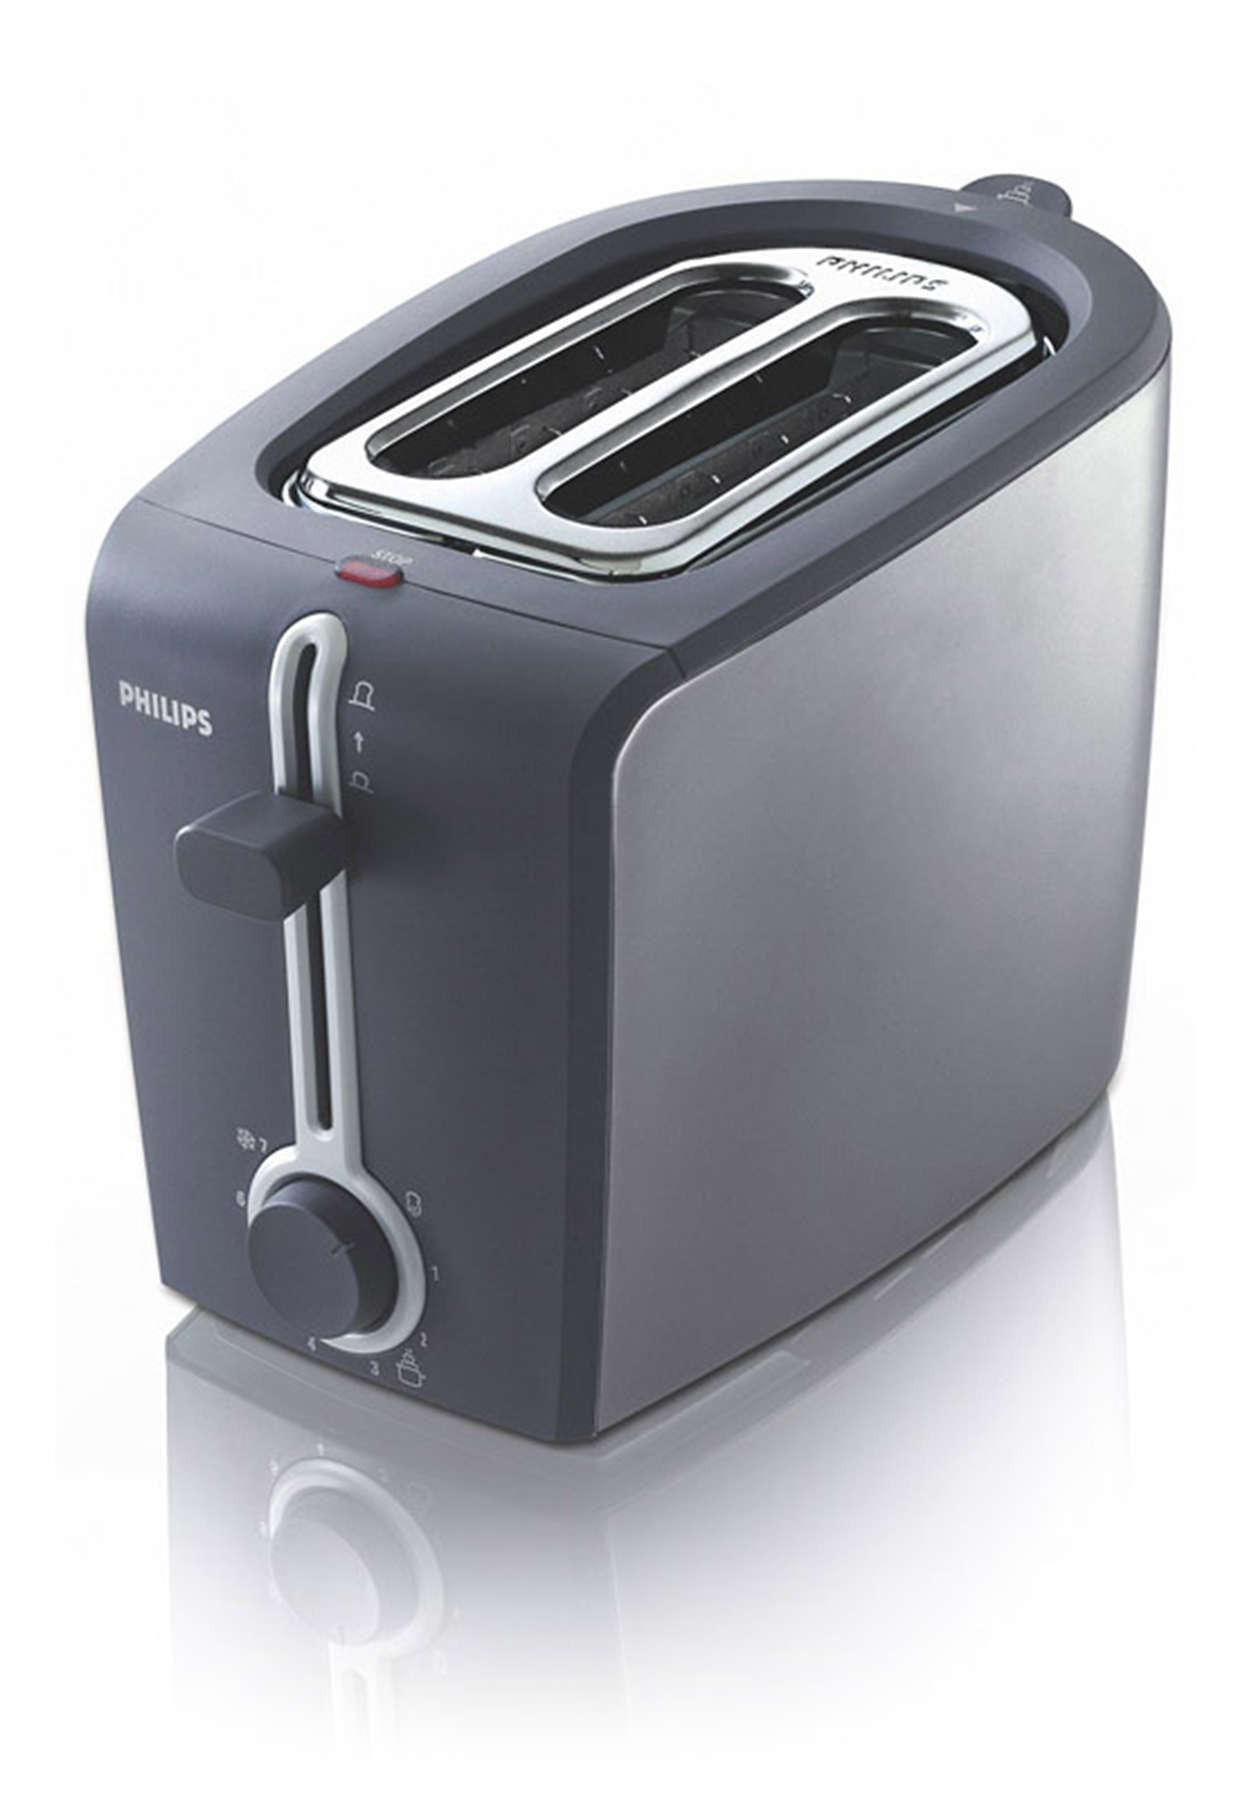 Great toast, easy cleaning